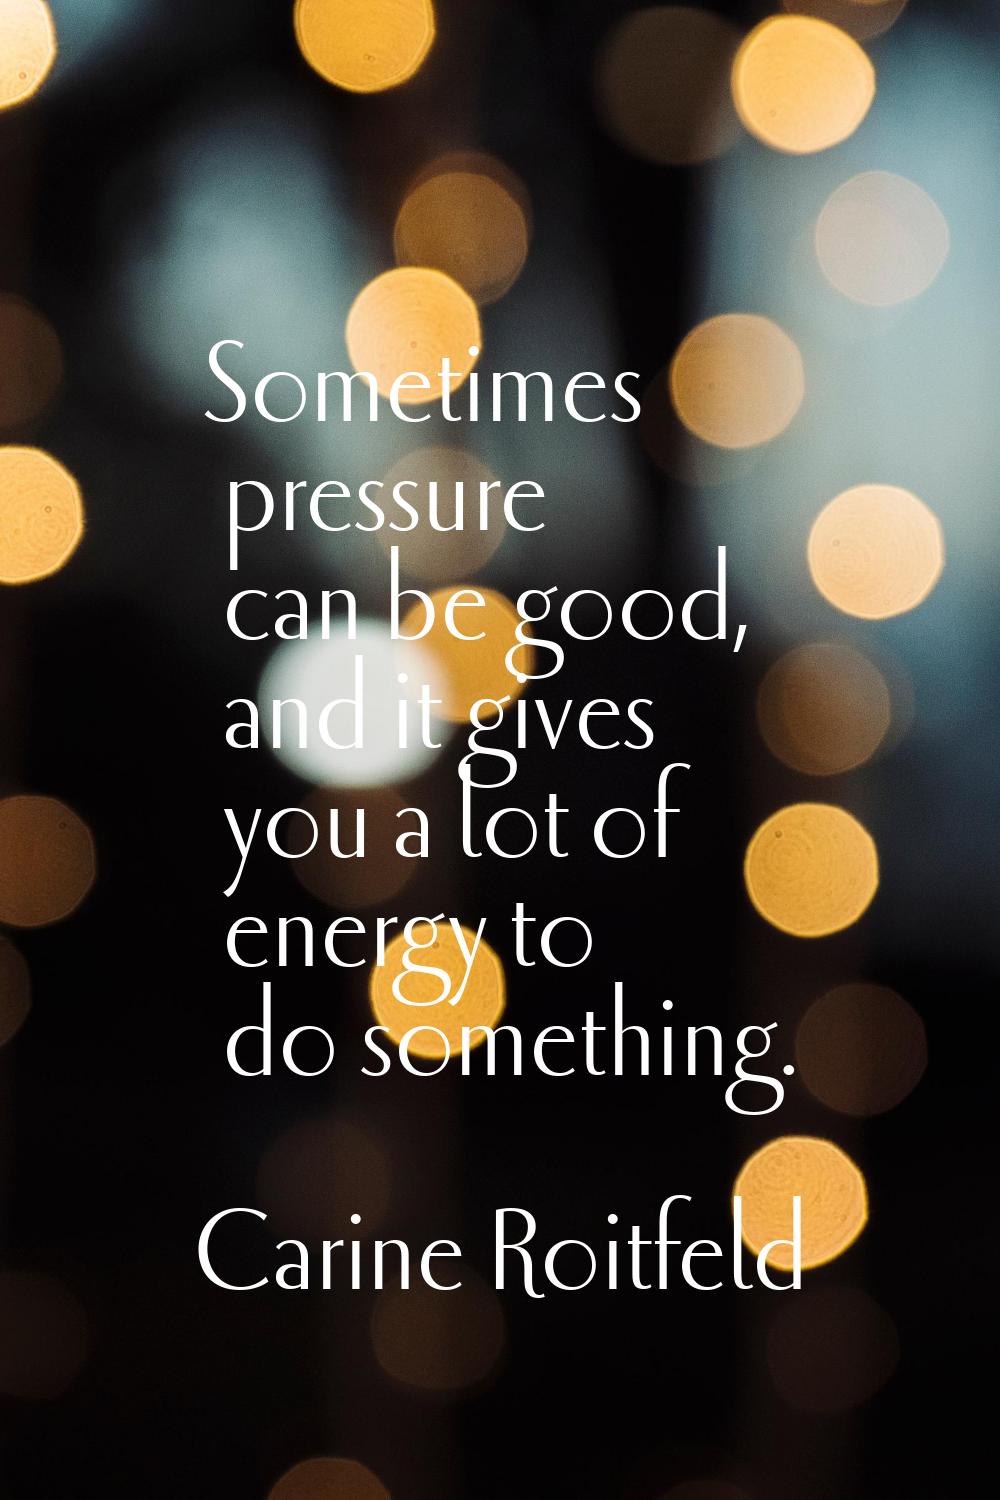 Sometimes pressure can be good, and it gives you a lot of energy to do something.